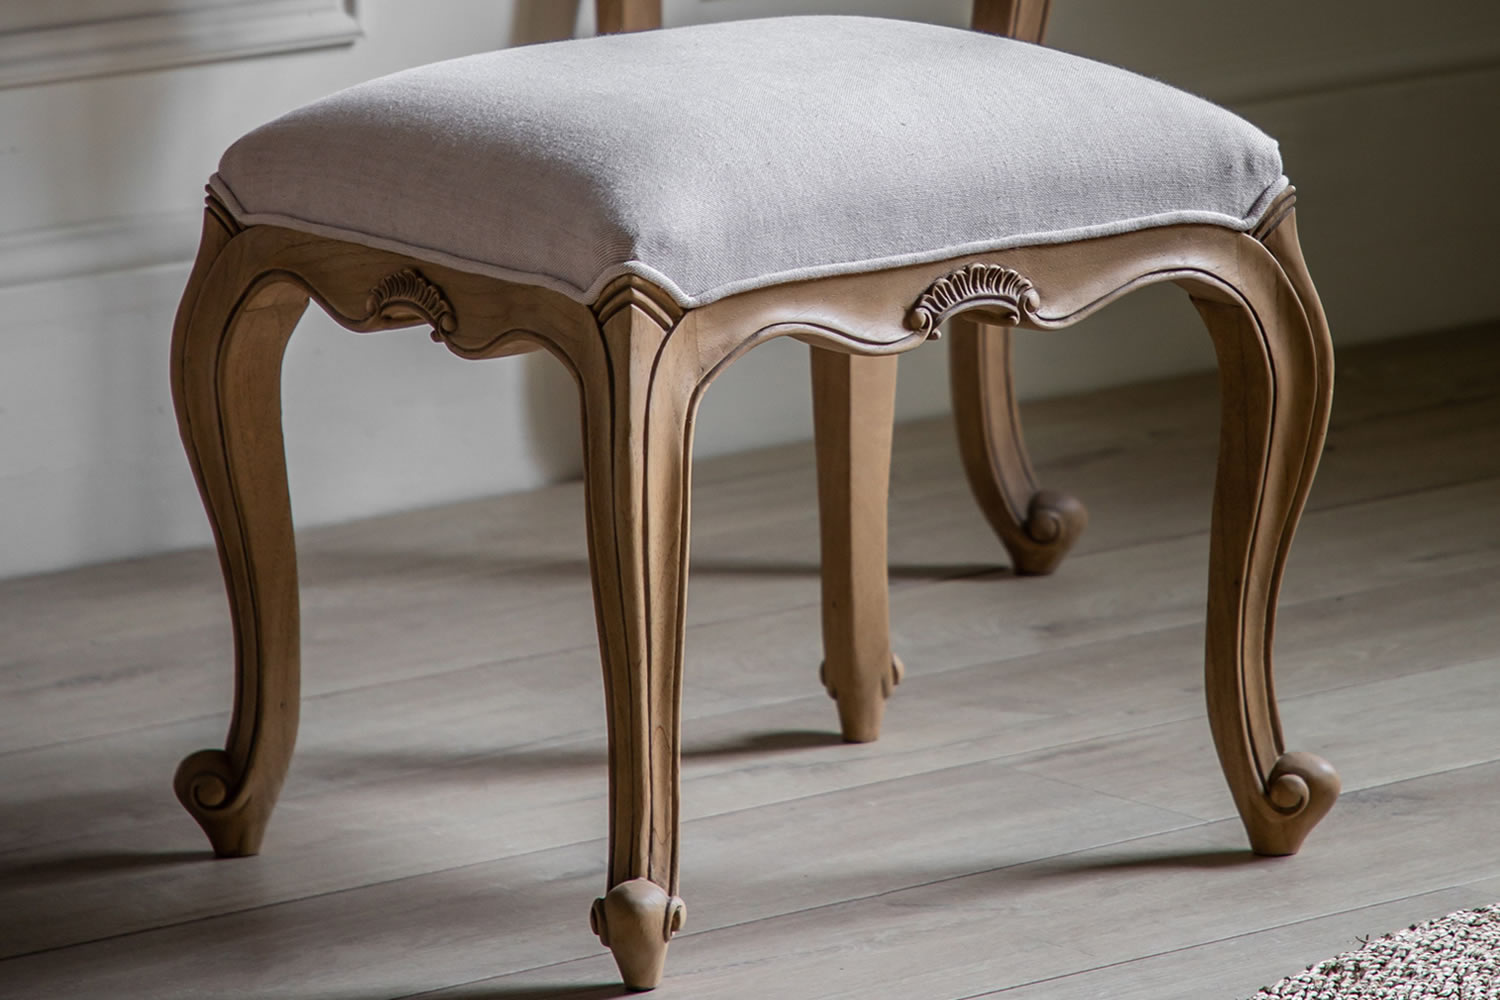 View Chic Bedroom Dressing Table Stool Crafted From Mindy Ash Elegant Weathered Finish Deeply Padded Seat Natural Linen Fabric French Inspired information